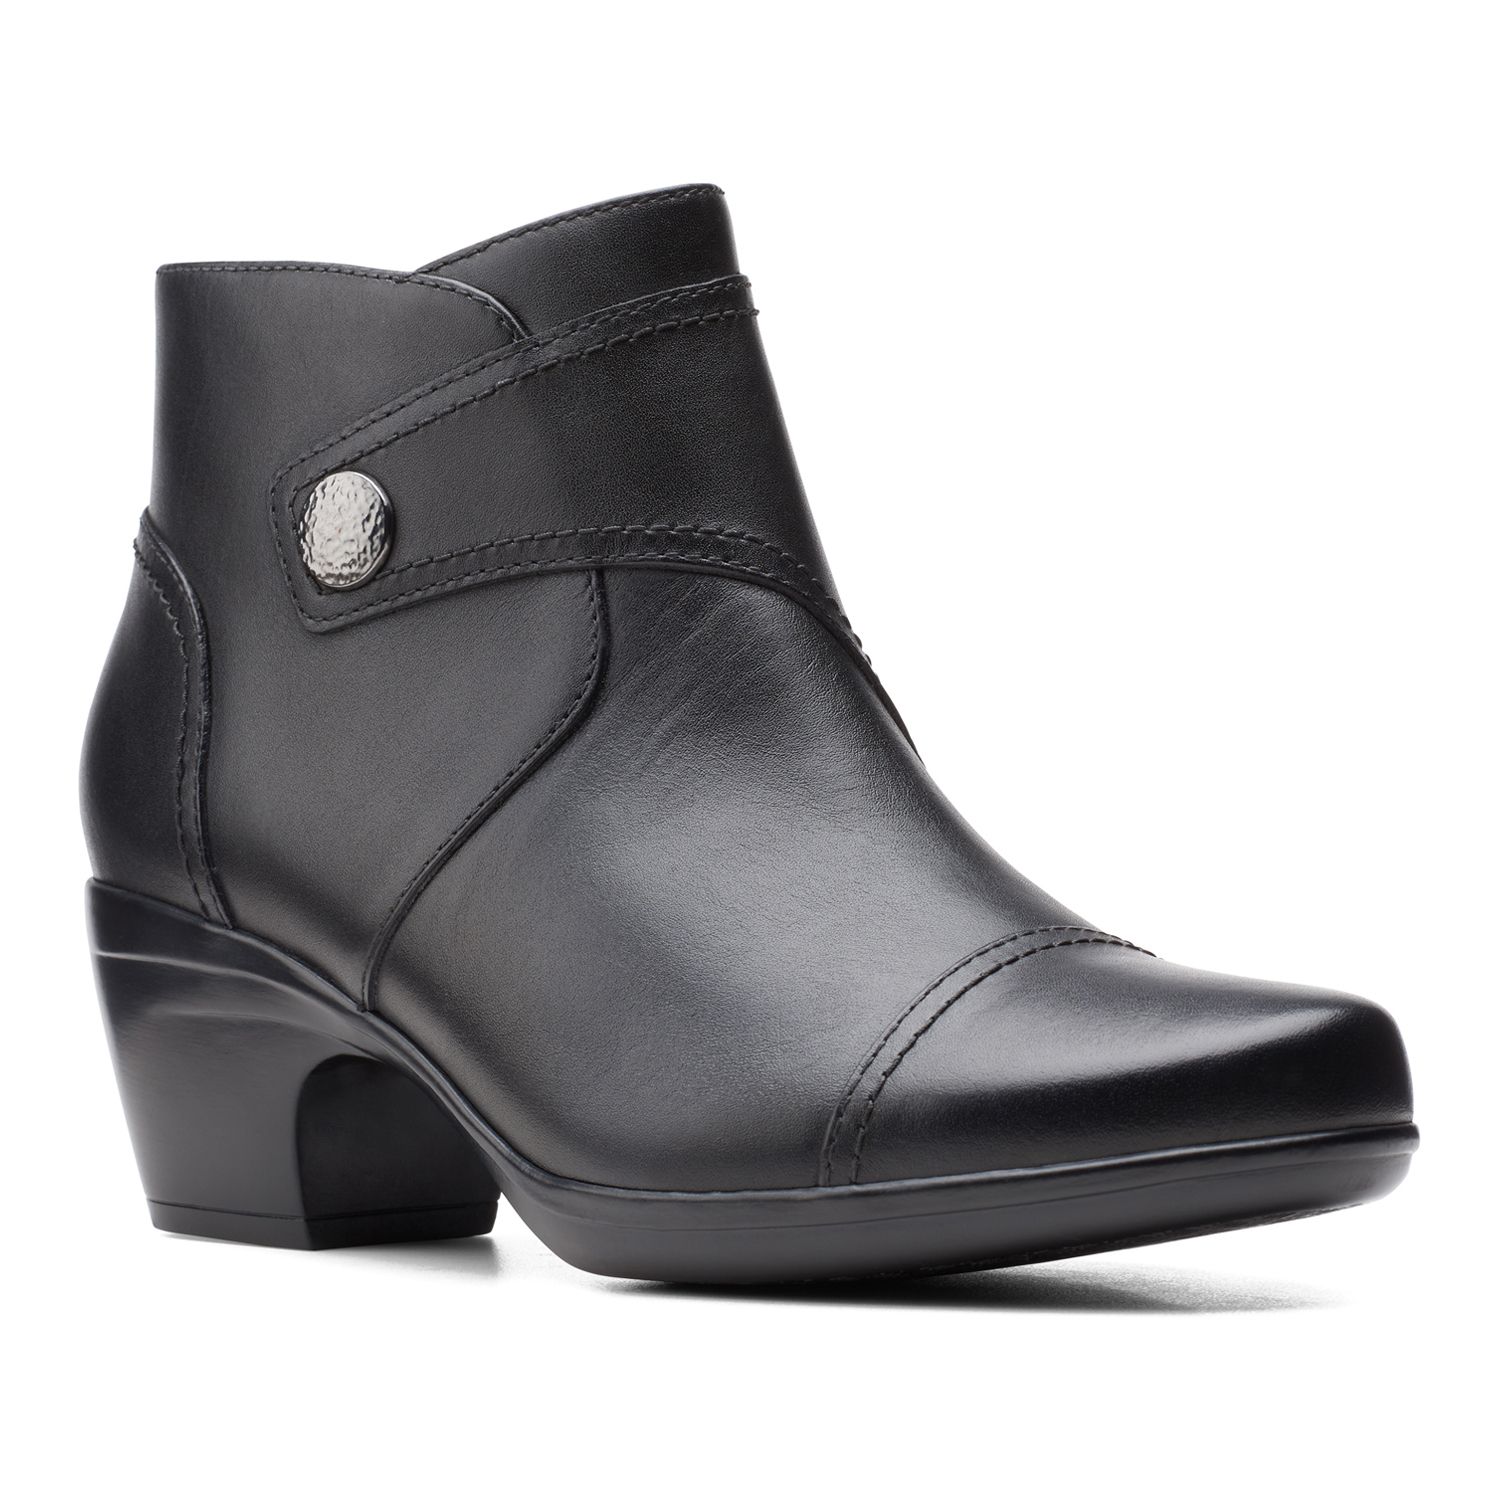 Clarks® Emily Calle Women's Ankle Boots